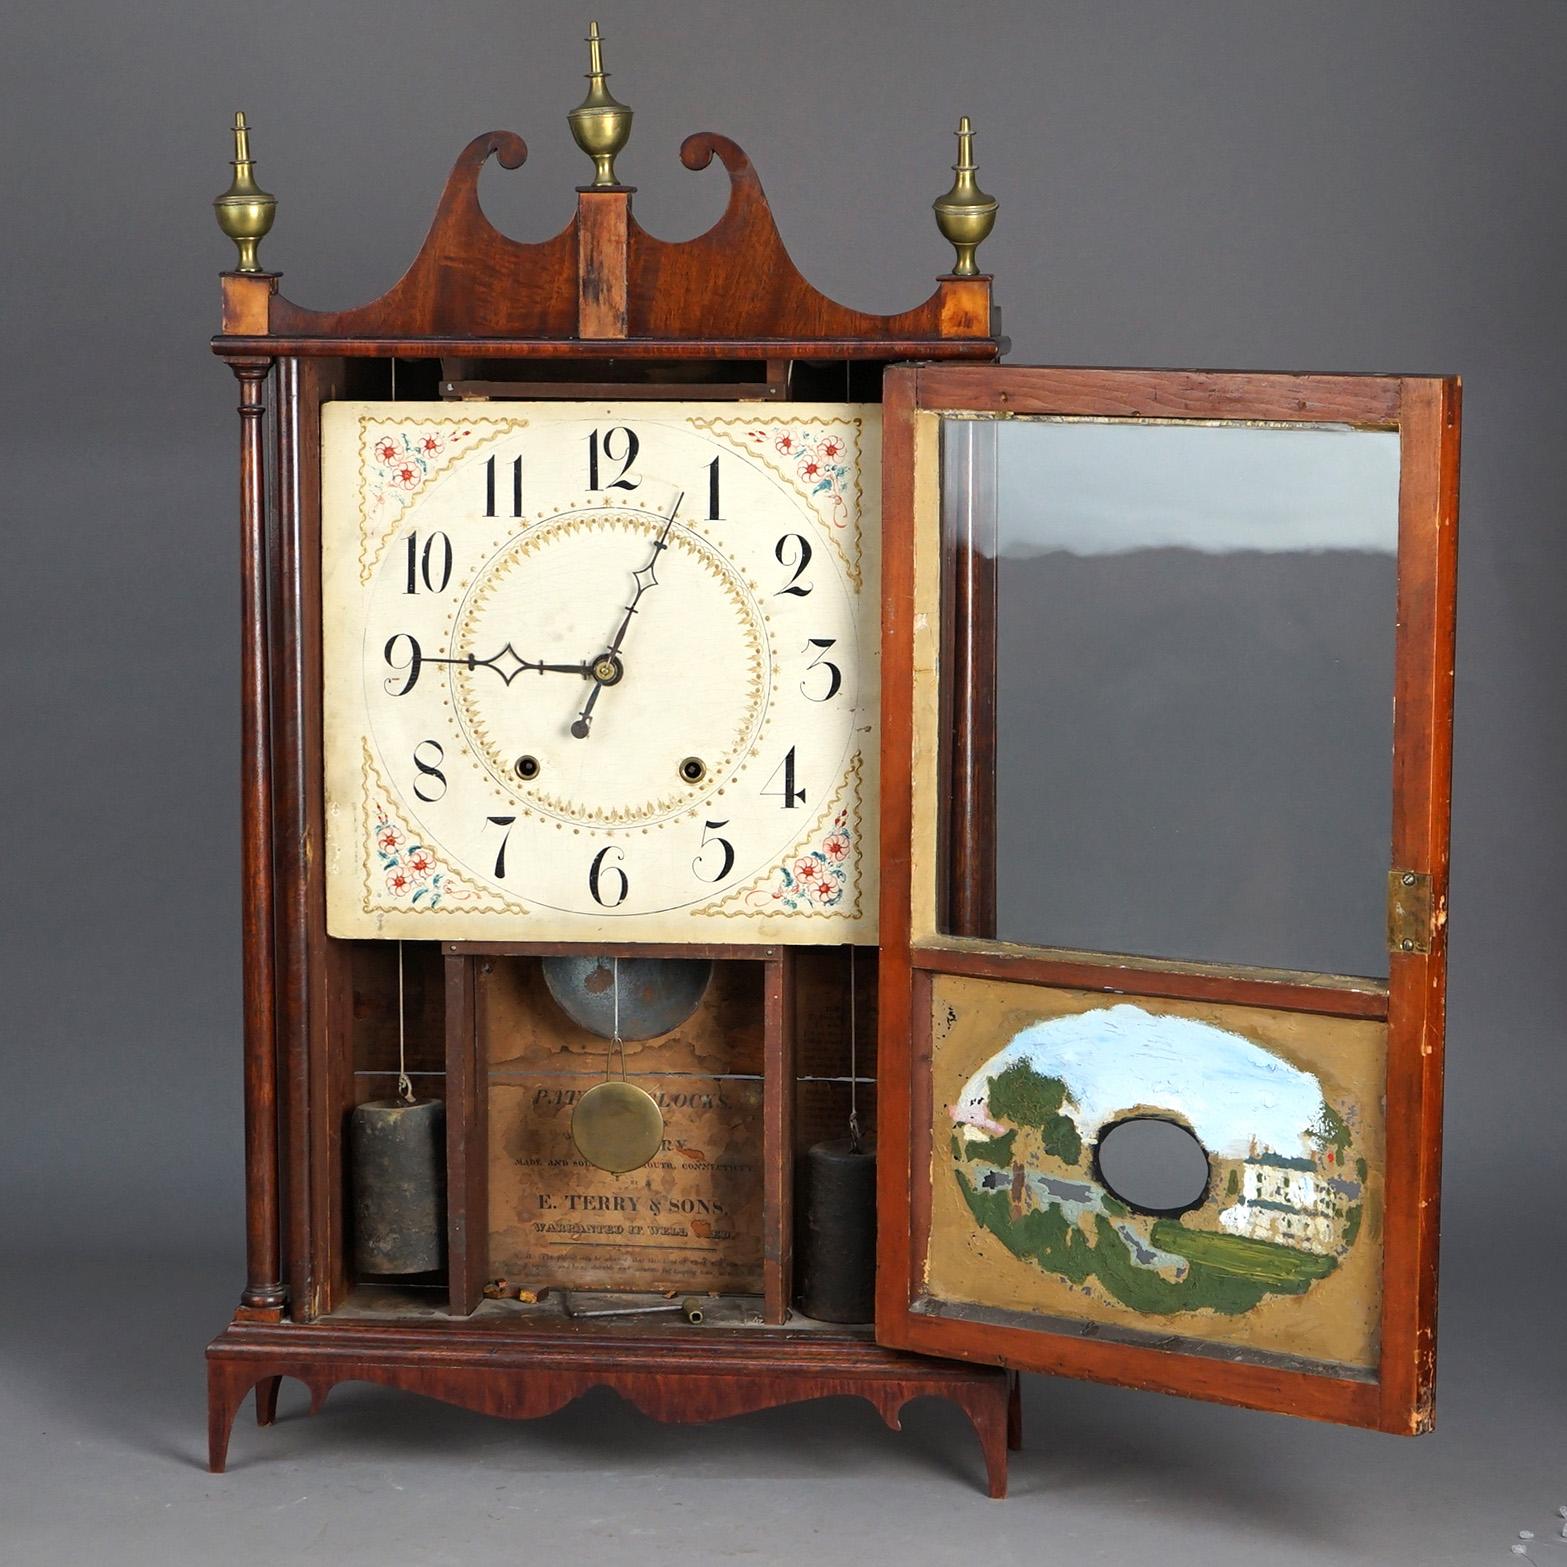 Antique Eli Terry Pillar & Scroll Mantle Clock with Mahogany Case, Eglomise Panel & Brass Finials C1830

Measures- 31''H x 17.5''W x 4.5''D